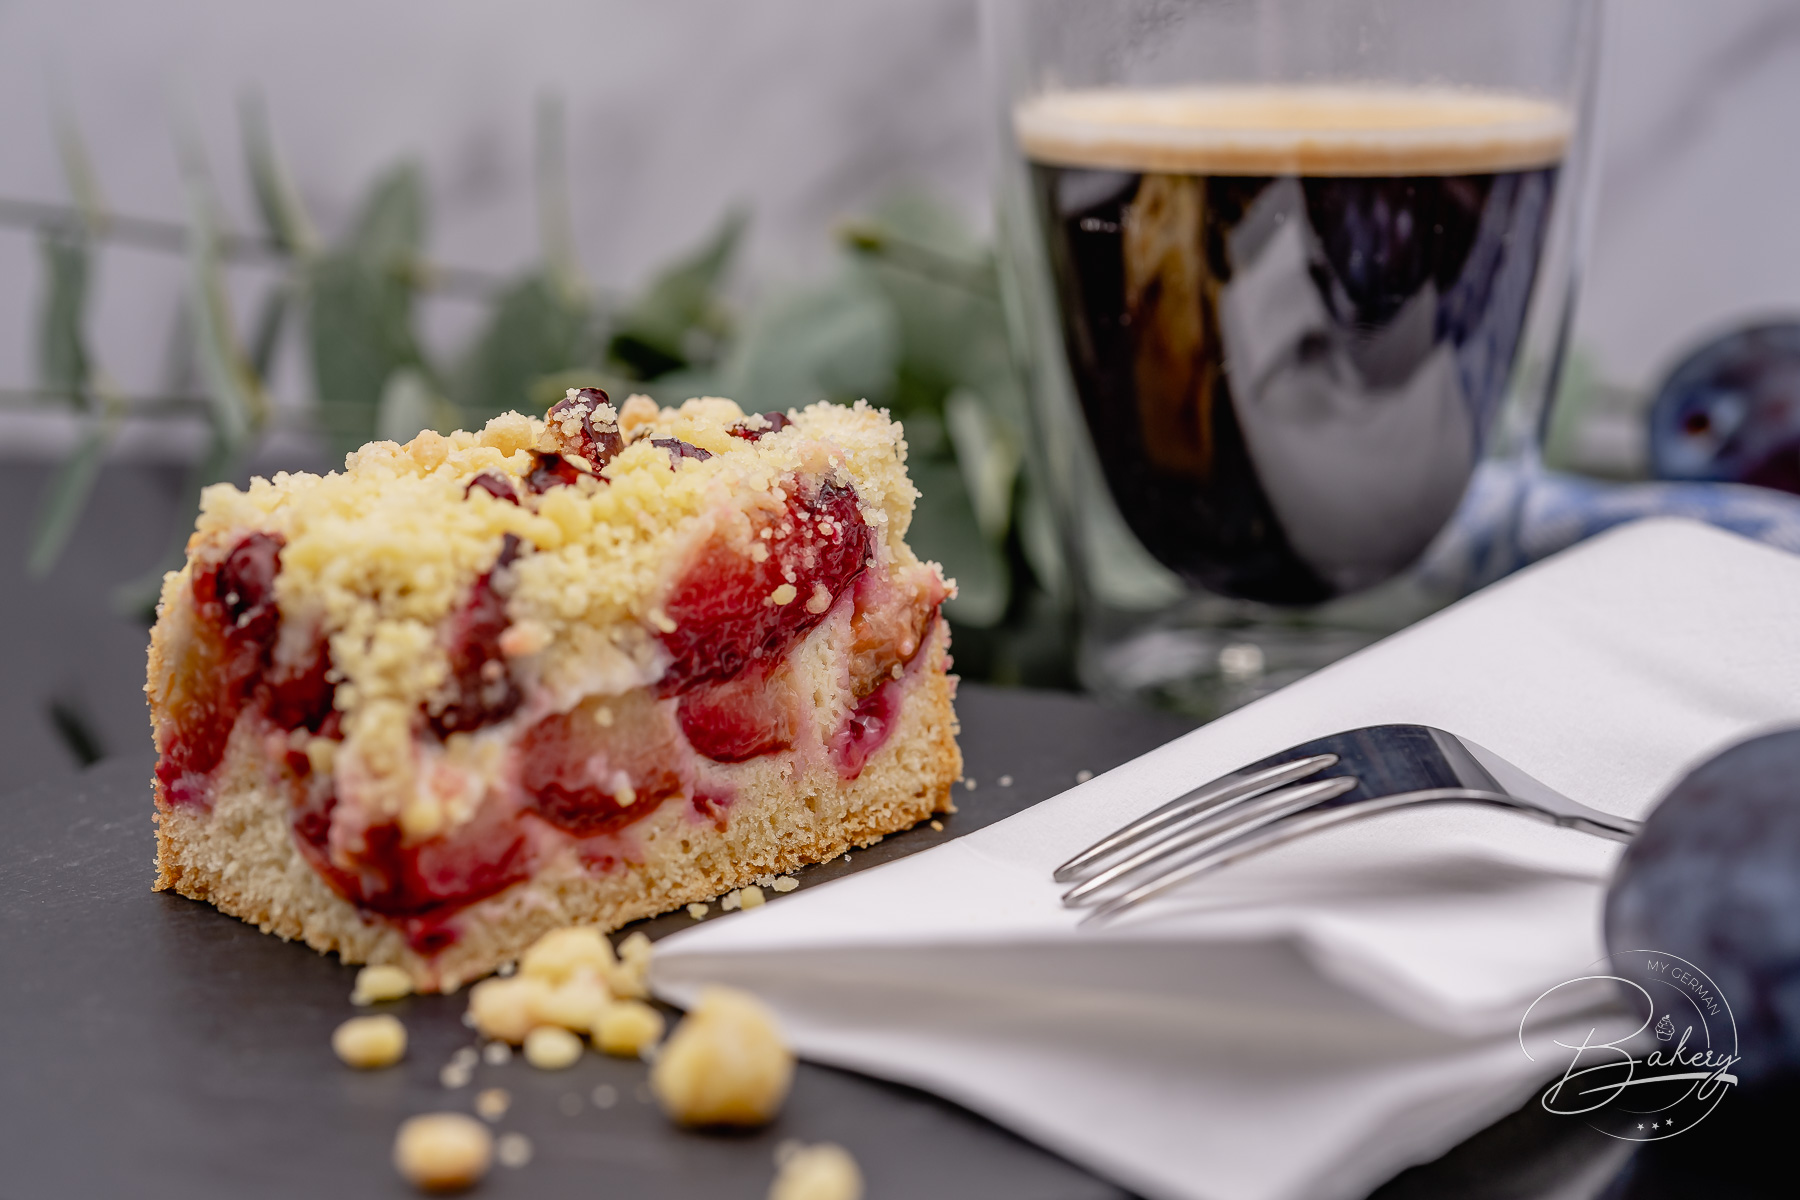 Plum cake recipe with crumble - Quick sheet cake - Plum crumble cake recipe - Plum cake recipe with crumble for a sheet of plum cake. Quick and easy sheet cake with plums. Juicy, soft, crunchy